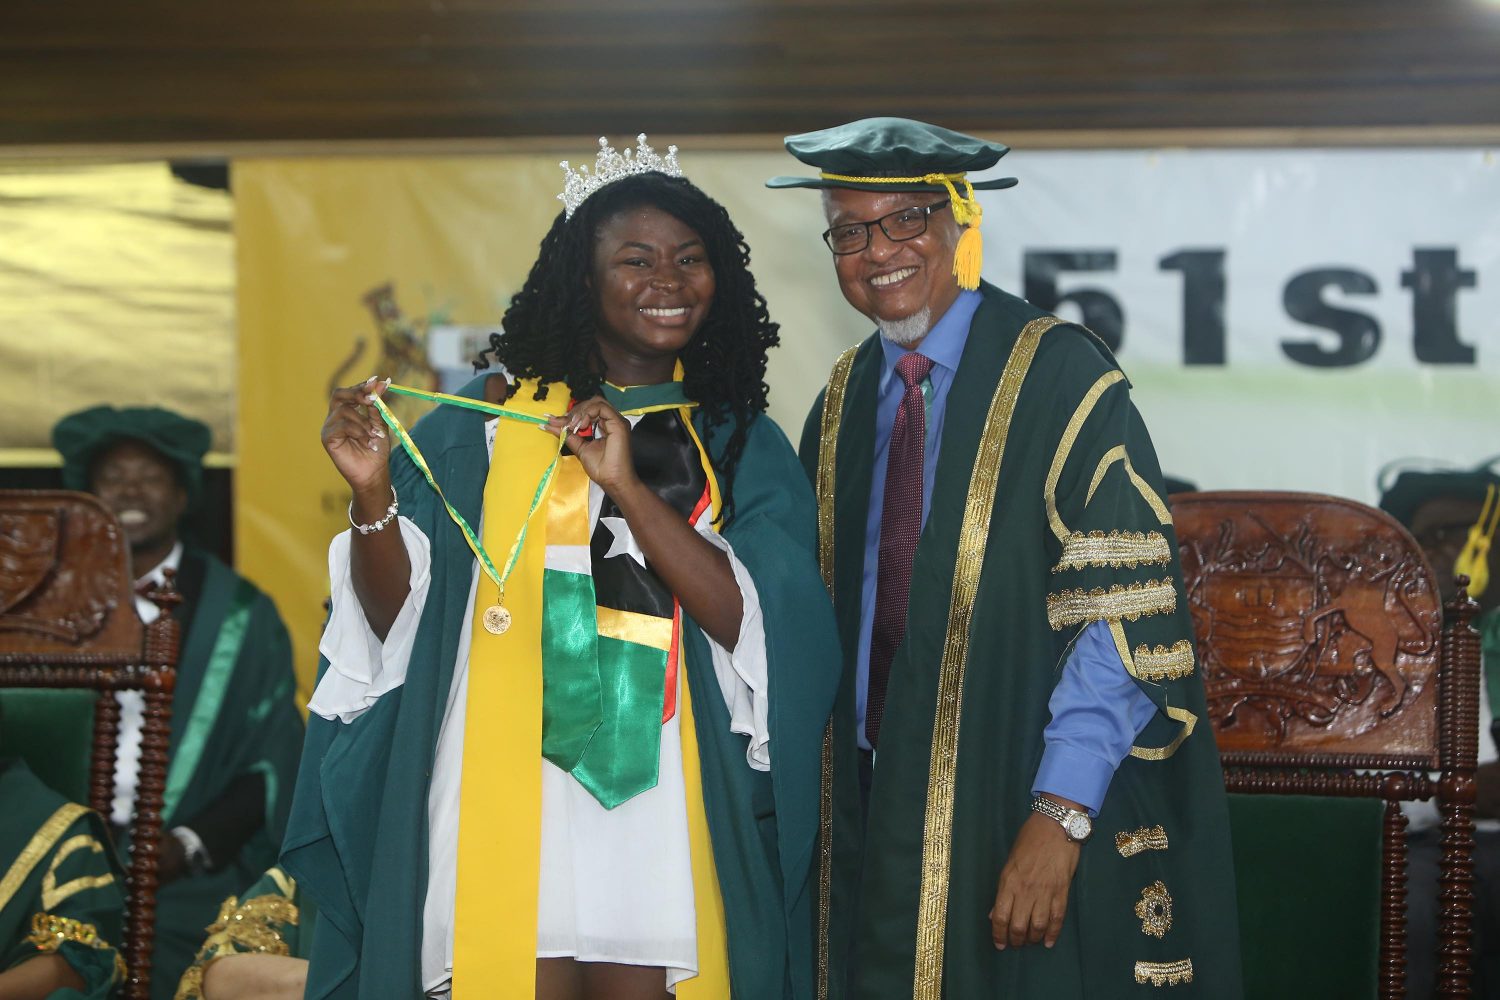 This year’s Best Graduating Student of the University of Guyana Elsie Harry posing with Chancellor Nigel Harris after being conferred with the President’s Award last evening at the institution’s 51st Convocation. Harry, who completed a Bachelors of Social Science Degree in International Relations with a perfect 4.0 Grade Point Average, was also conferred with three other awards.  (Photo by Keno George) 